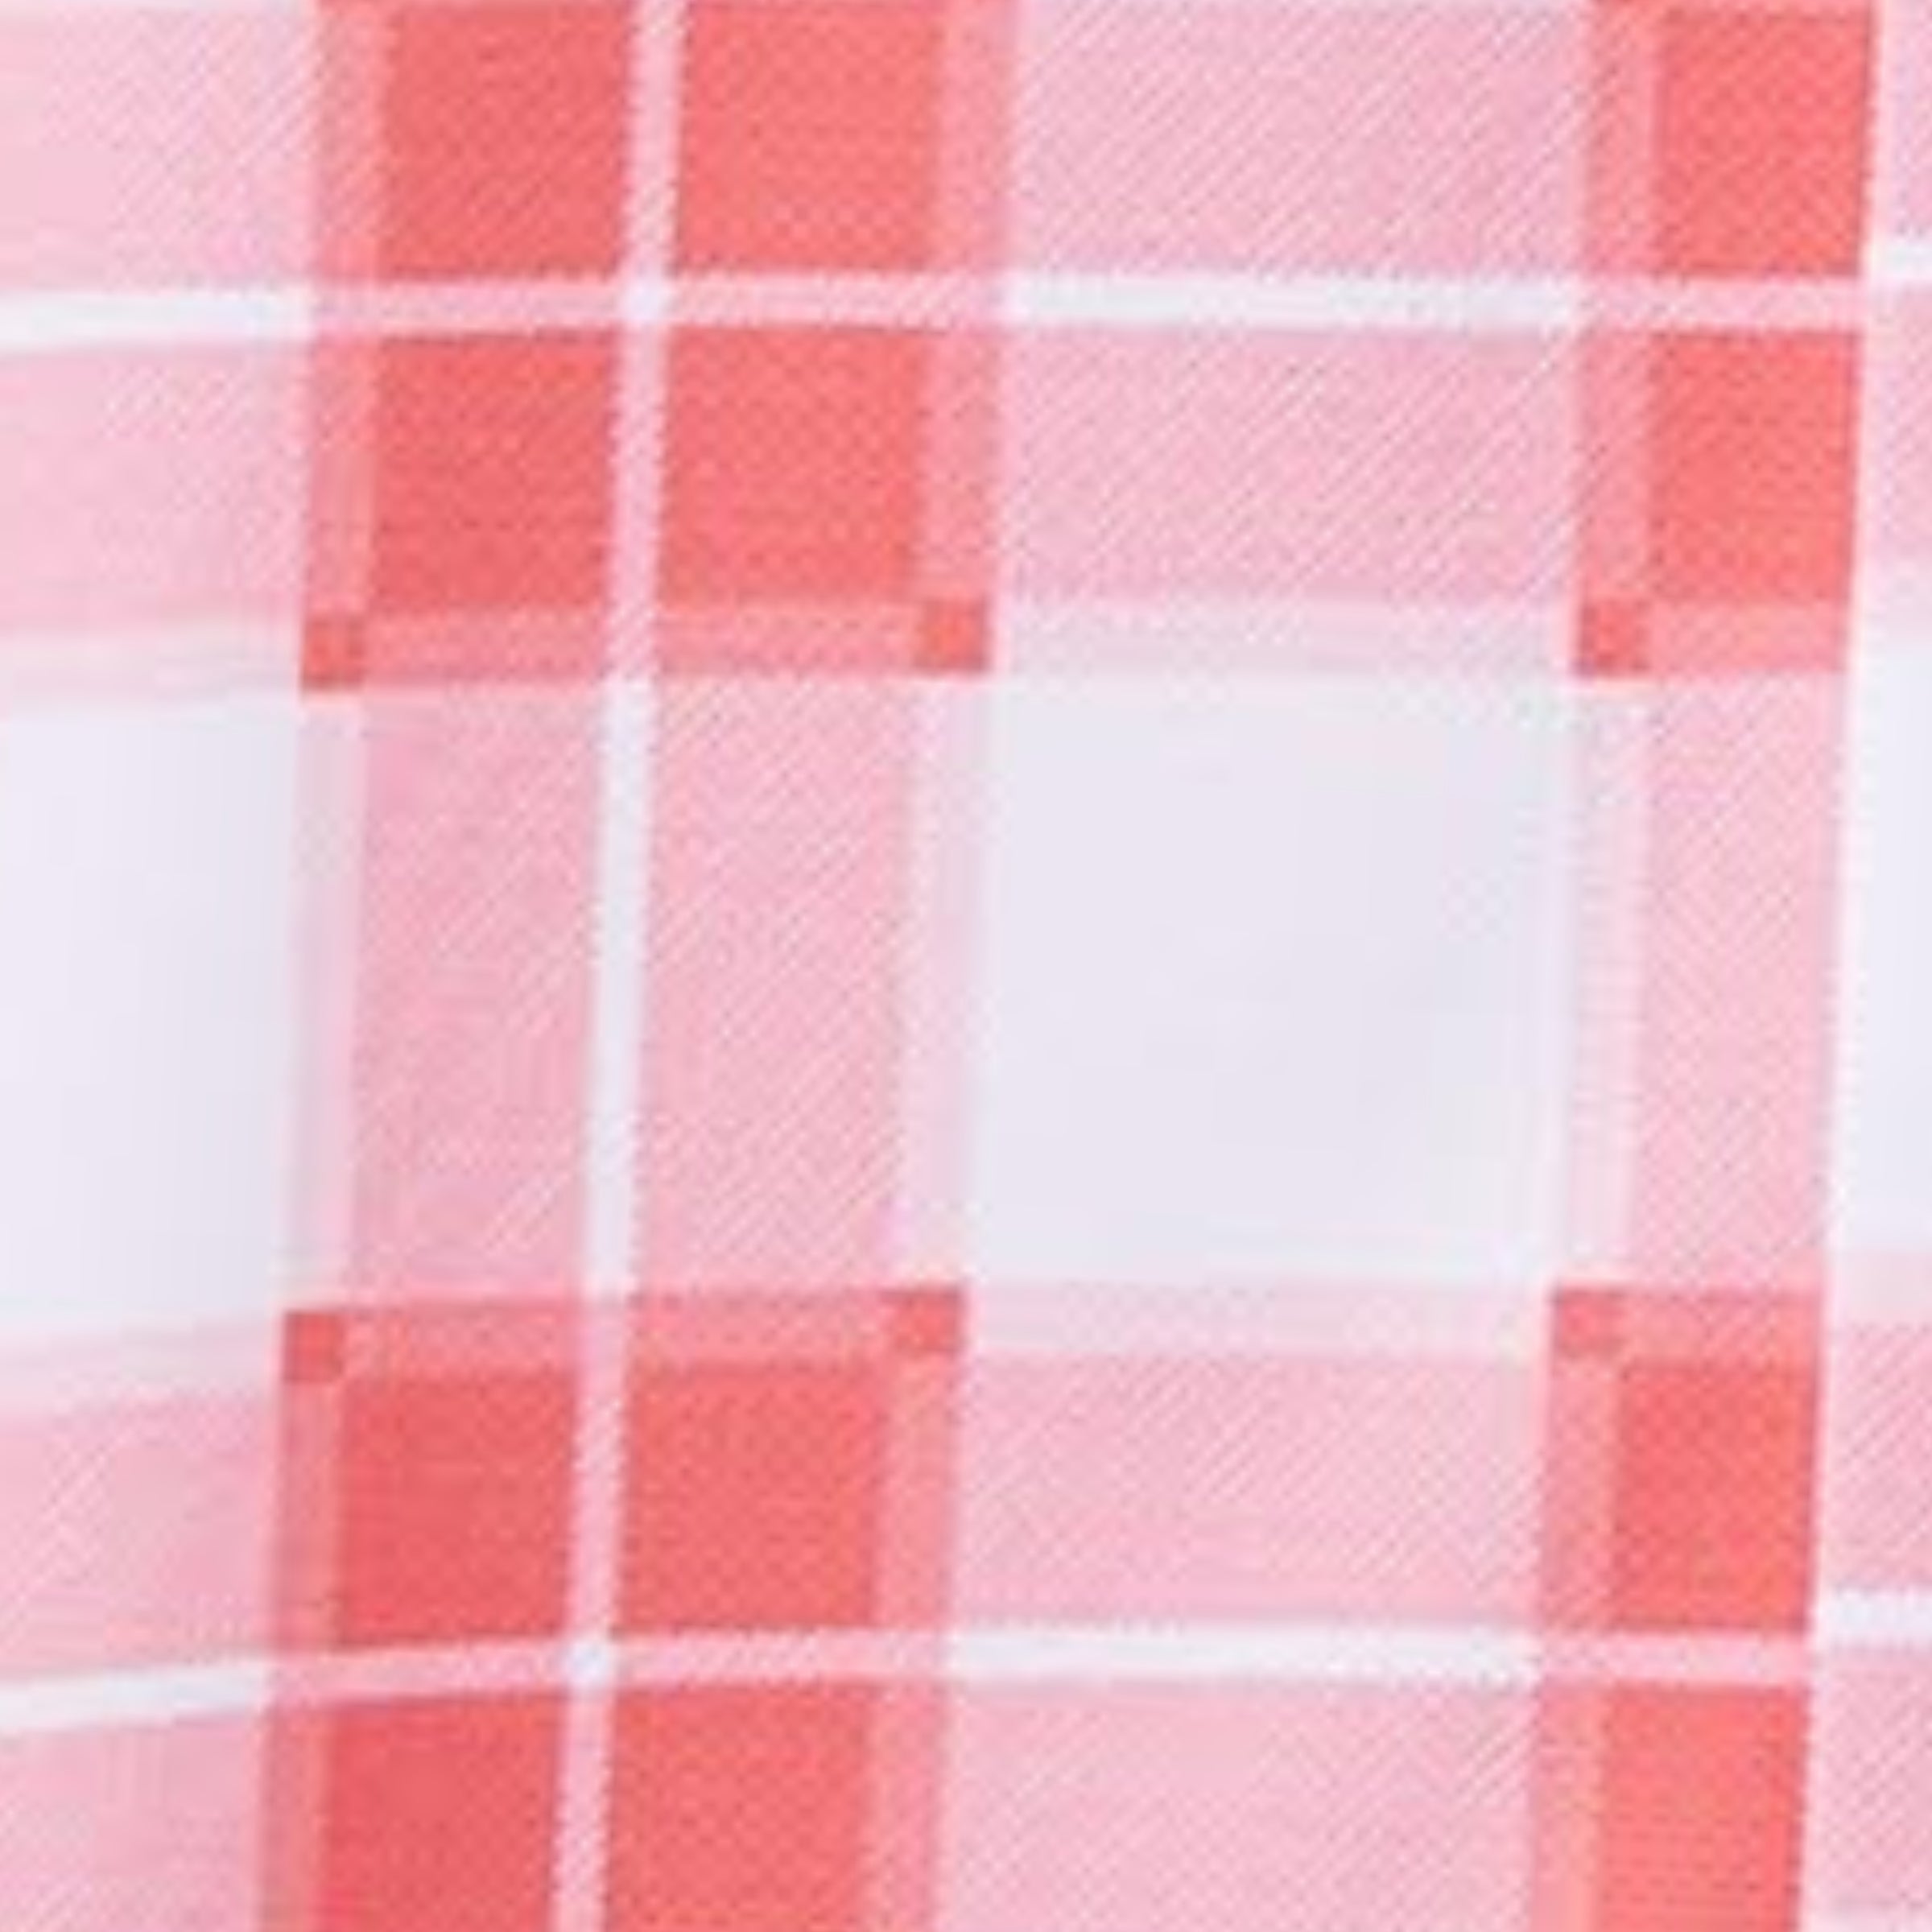 MagnaReady x Arctic Cooling Pique Polo Short Sleeves in Red Gingham